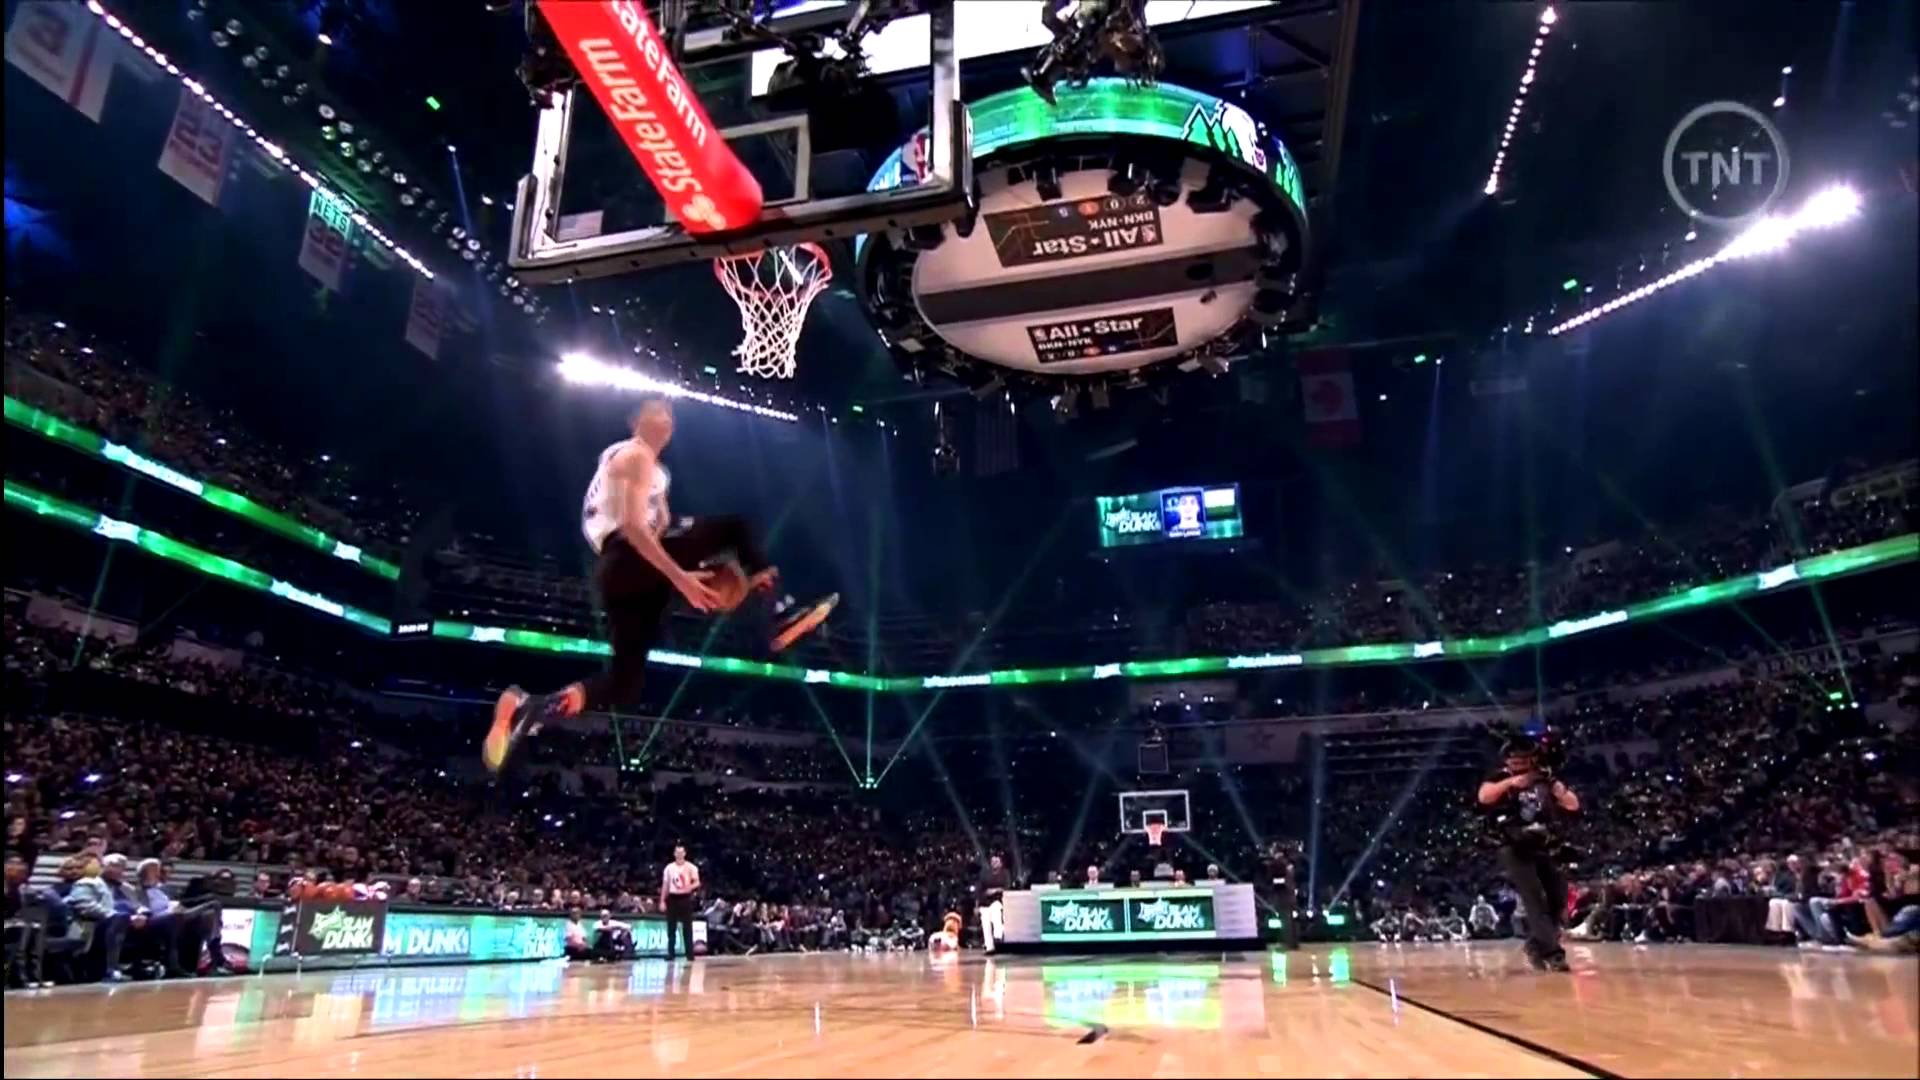 Zach LaVine brings back Dunk Contest. At least for a night